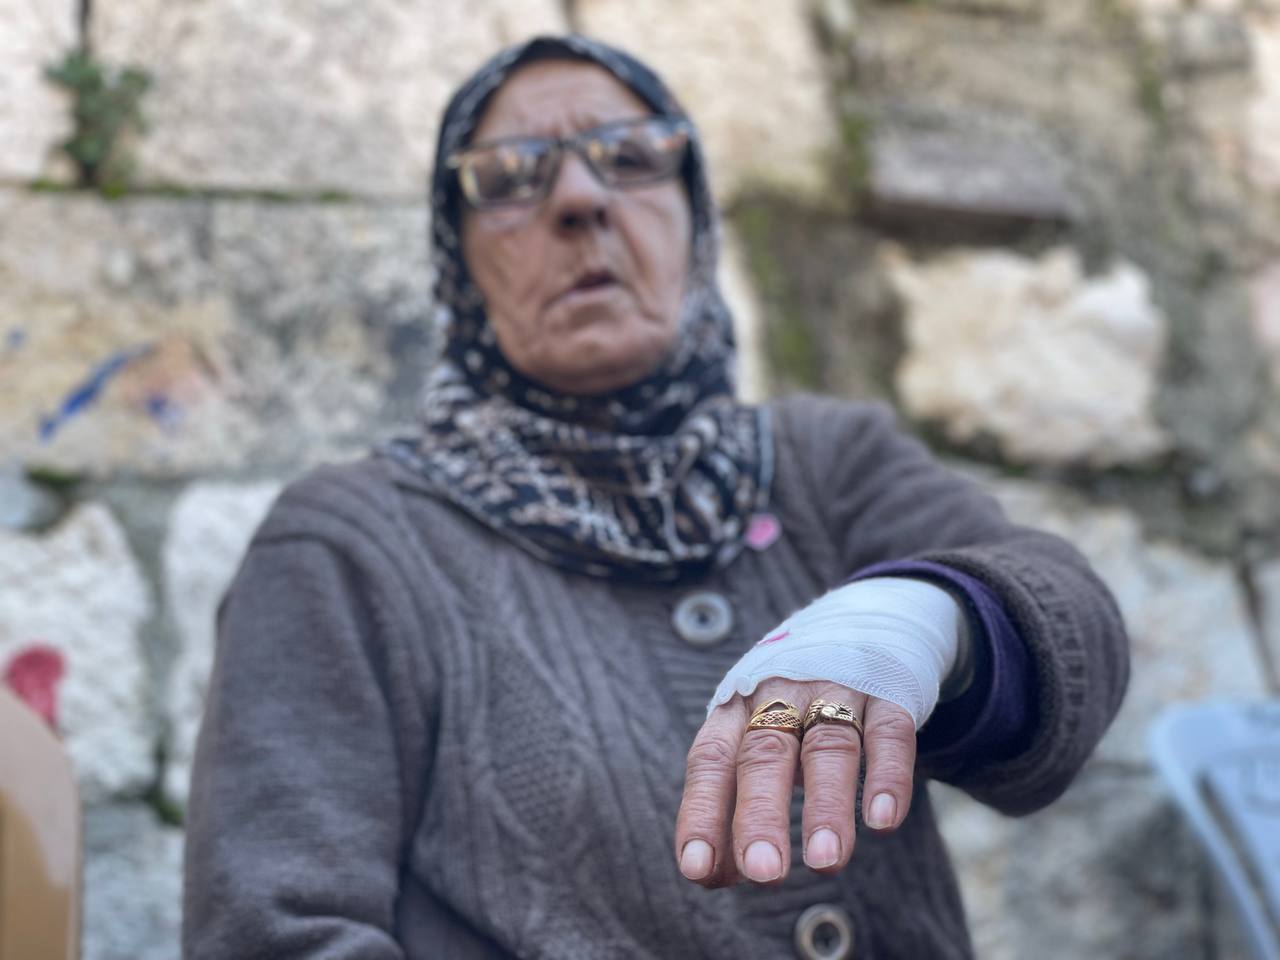 Fatima Salem, 73, owner of Palestinian home in East Jerusalem's Sheikh Jarrah was assulted by settlers on 13 February 2021. (Latifeh Abdellatif/MEE)